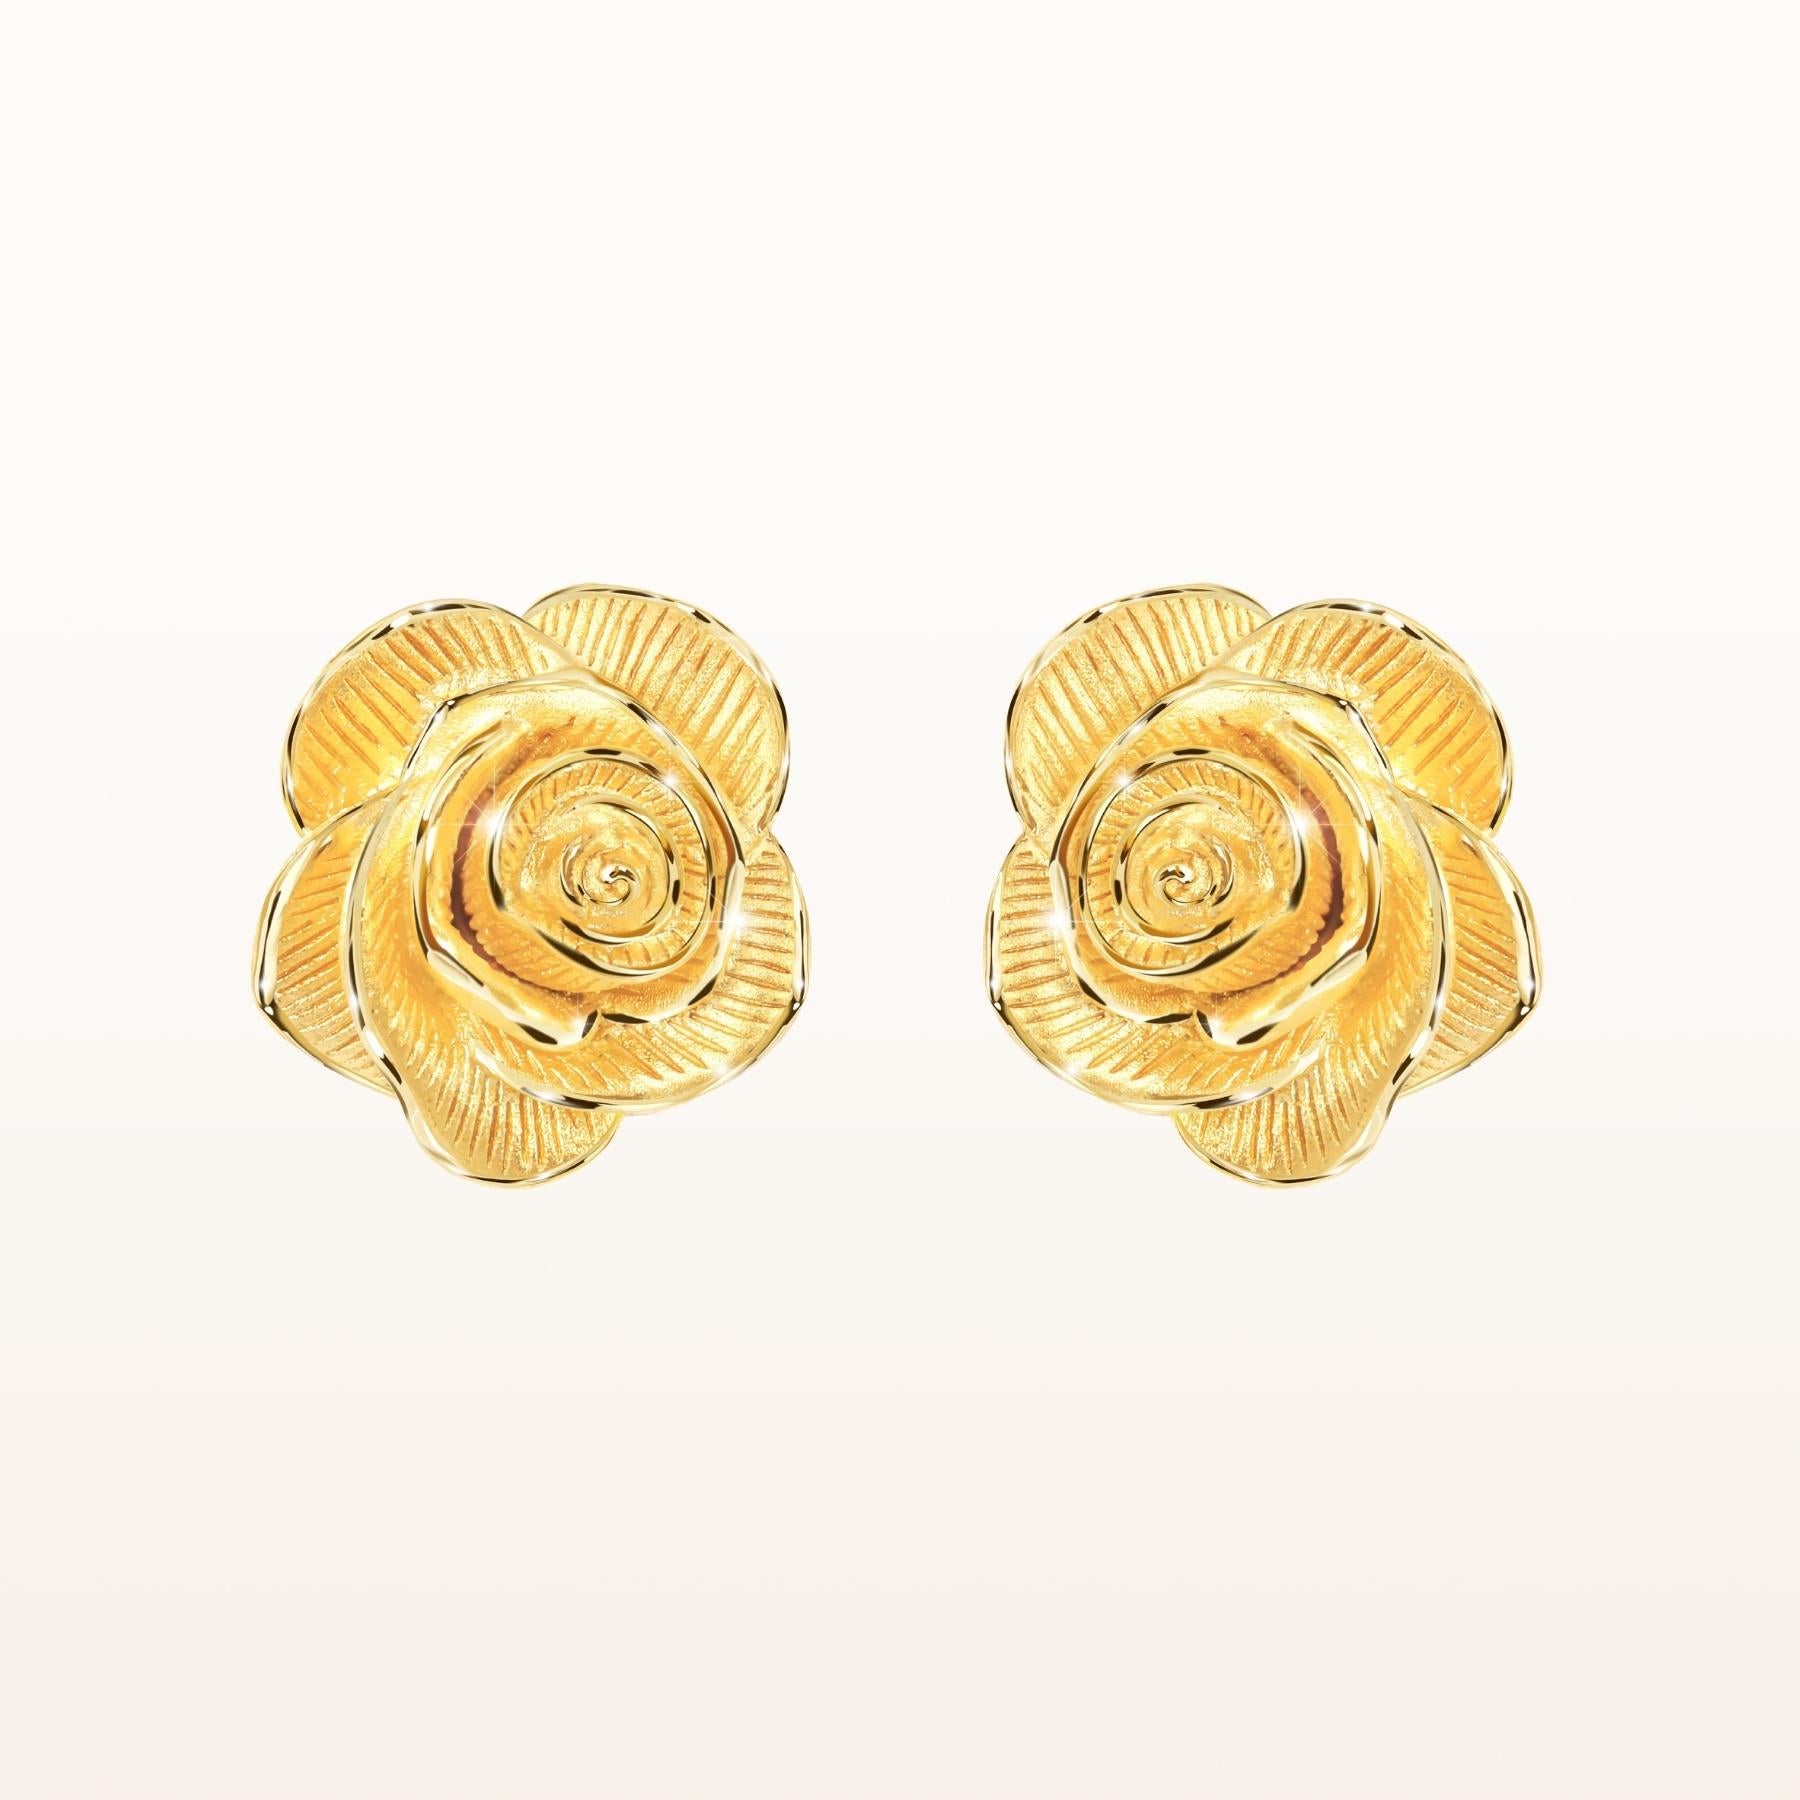 Accessher Gold Plated Traditional Rhinestones Embellished Circular Shape Design  Stud Earrings with Push Back Closure for Women and Girls Pack of 1 Pair :  Amazon.in: Fashion